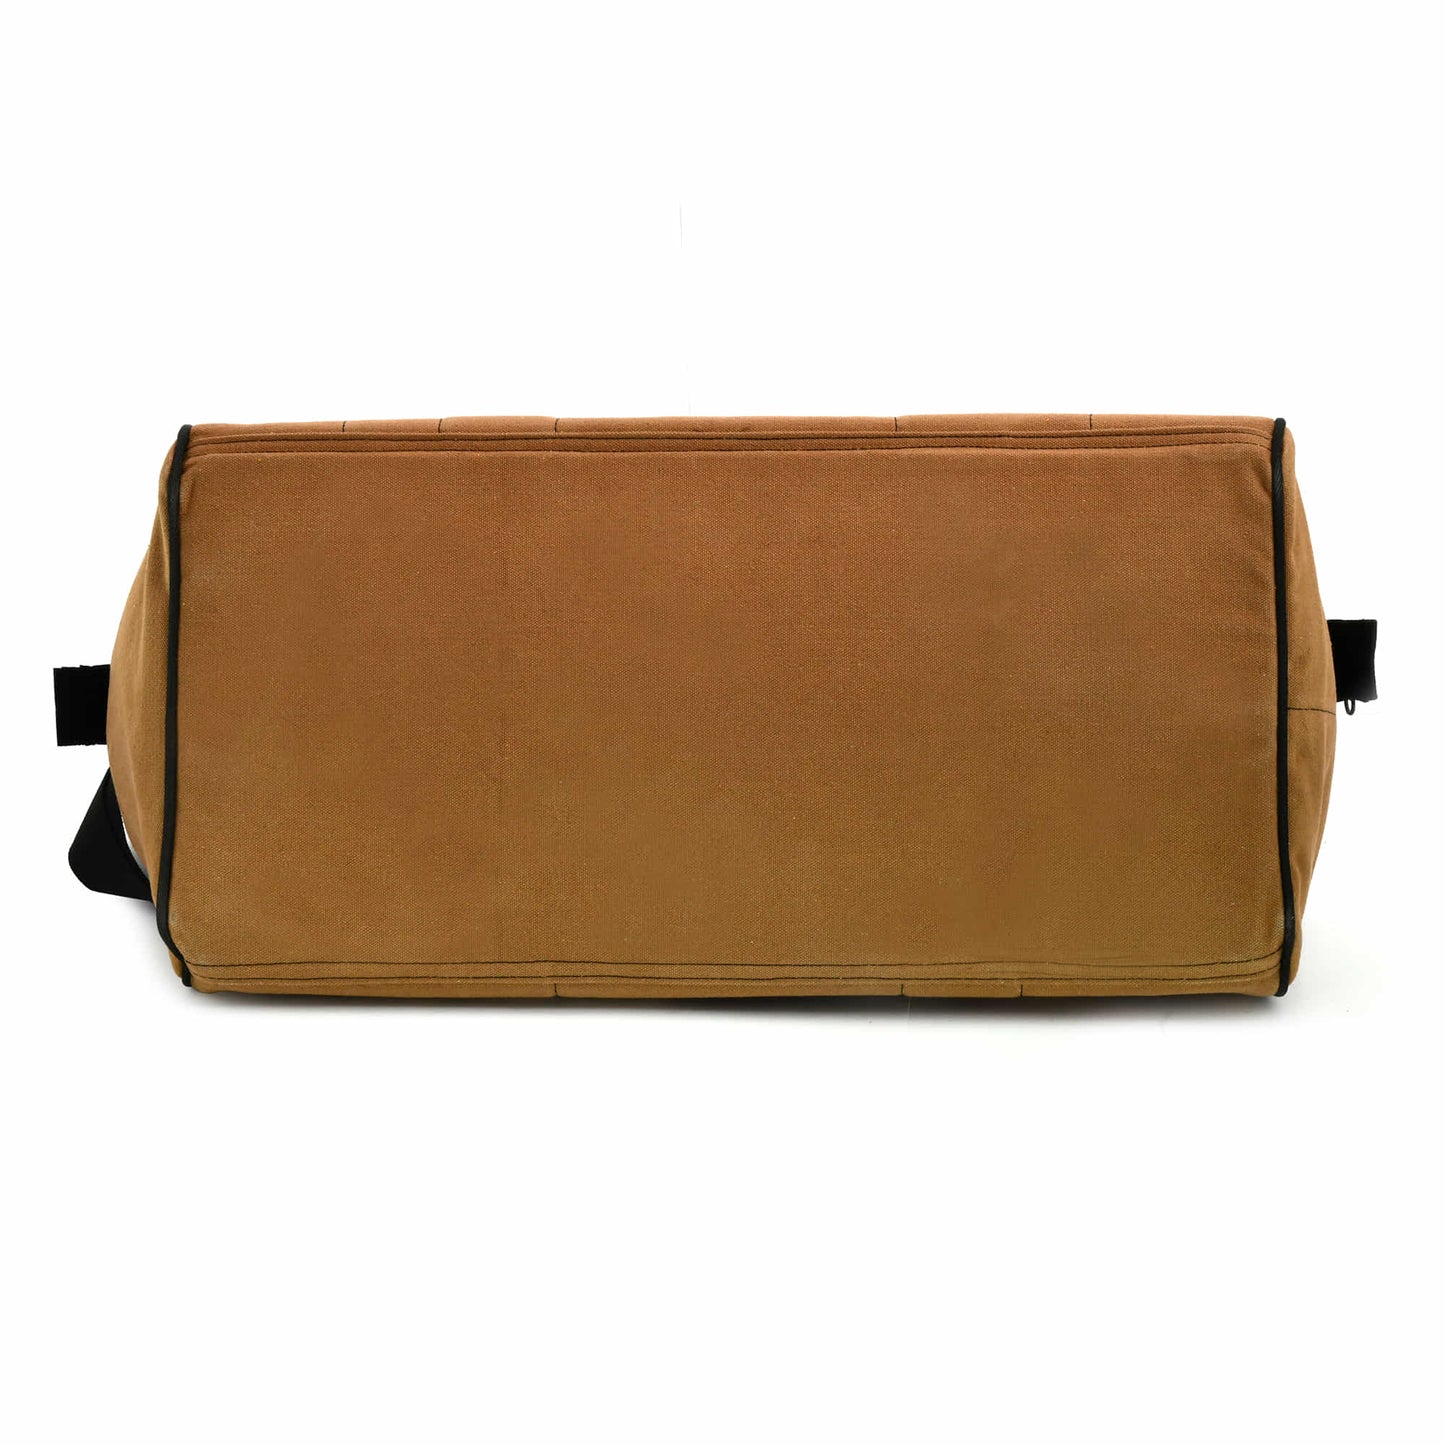 Style n Craft 97012 - 25 Pocket 20 Inch Wide Mouth Tool Bag in Brown Waterproof Canvas with Black Binding - External Bottom View